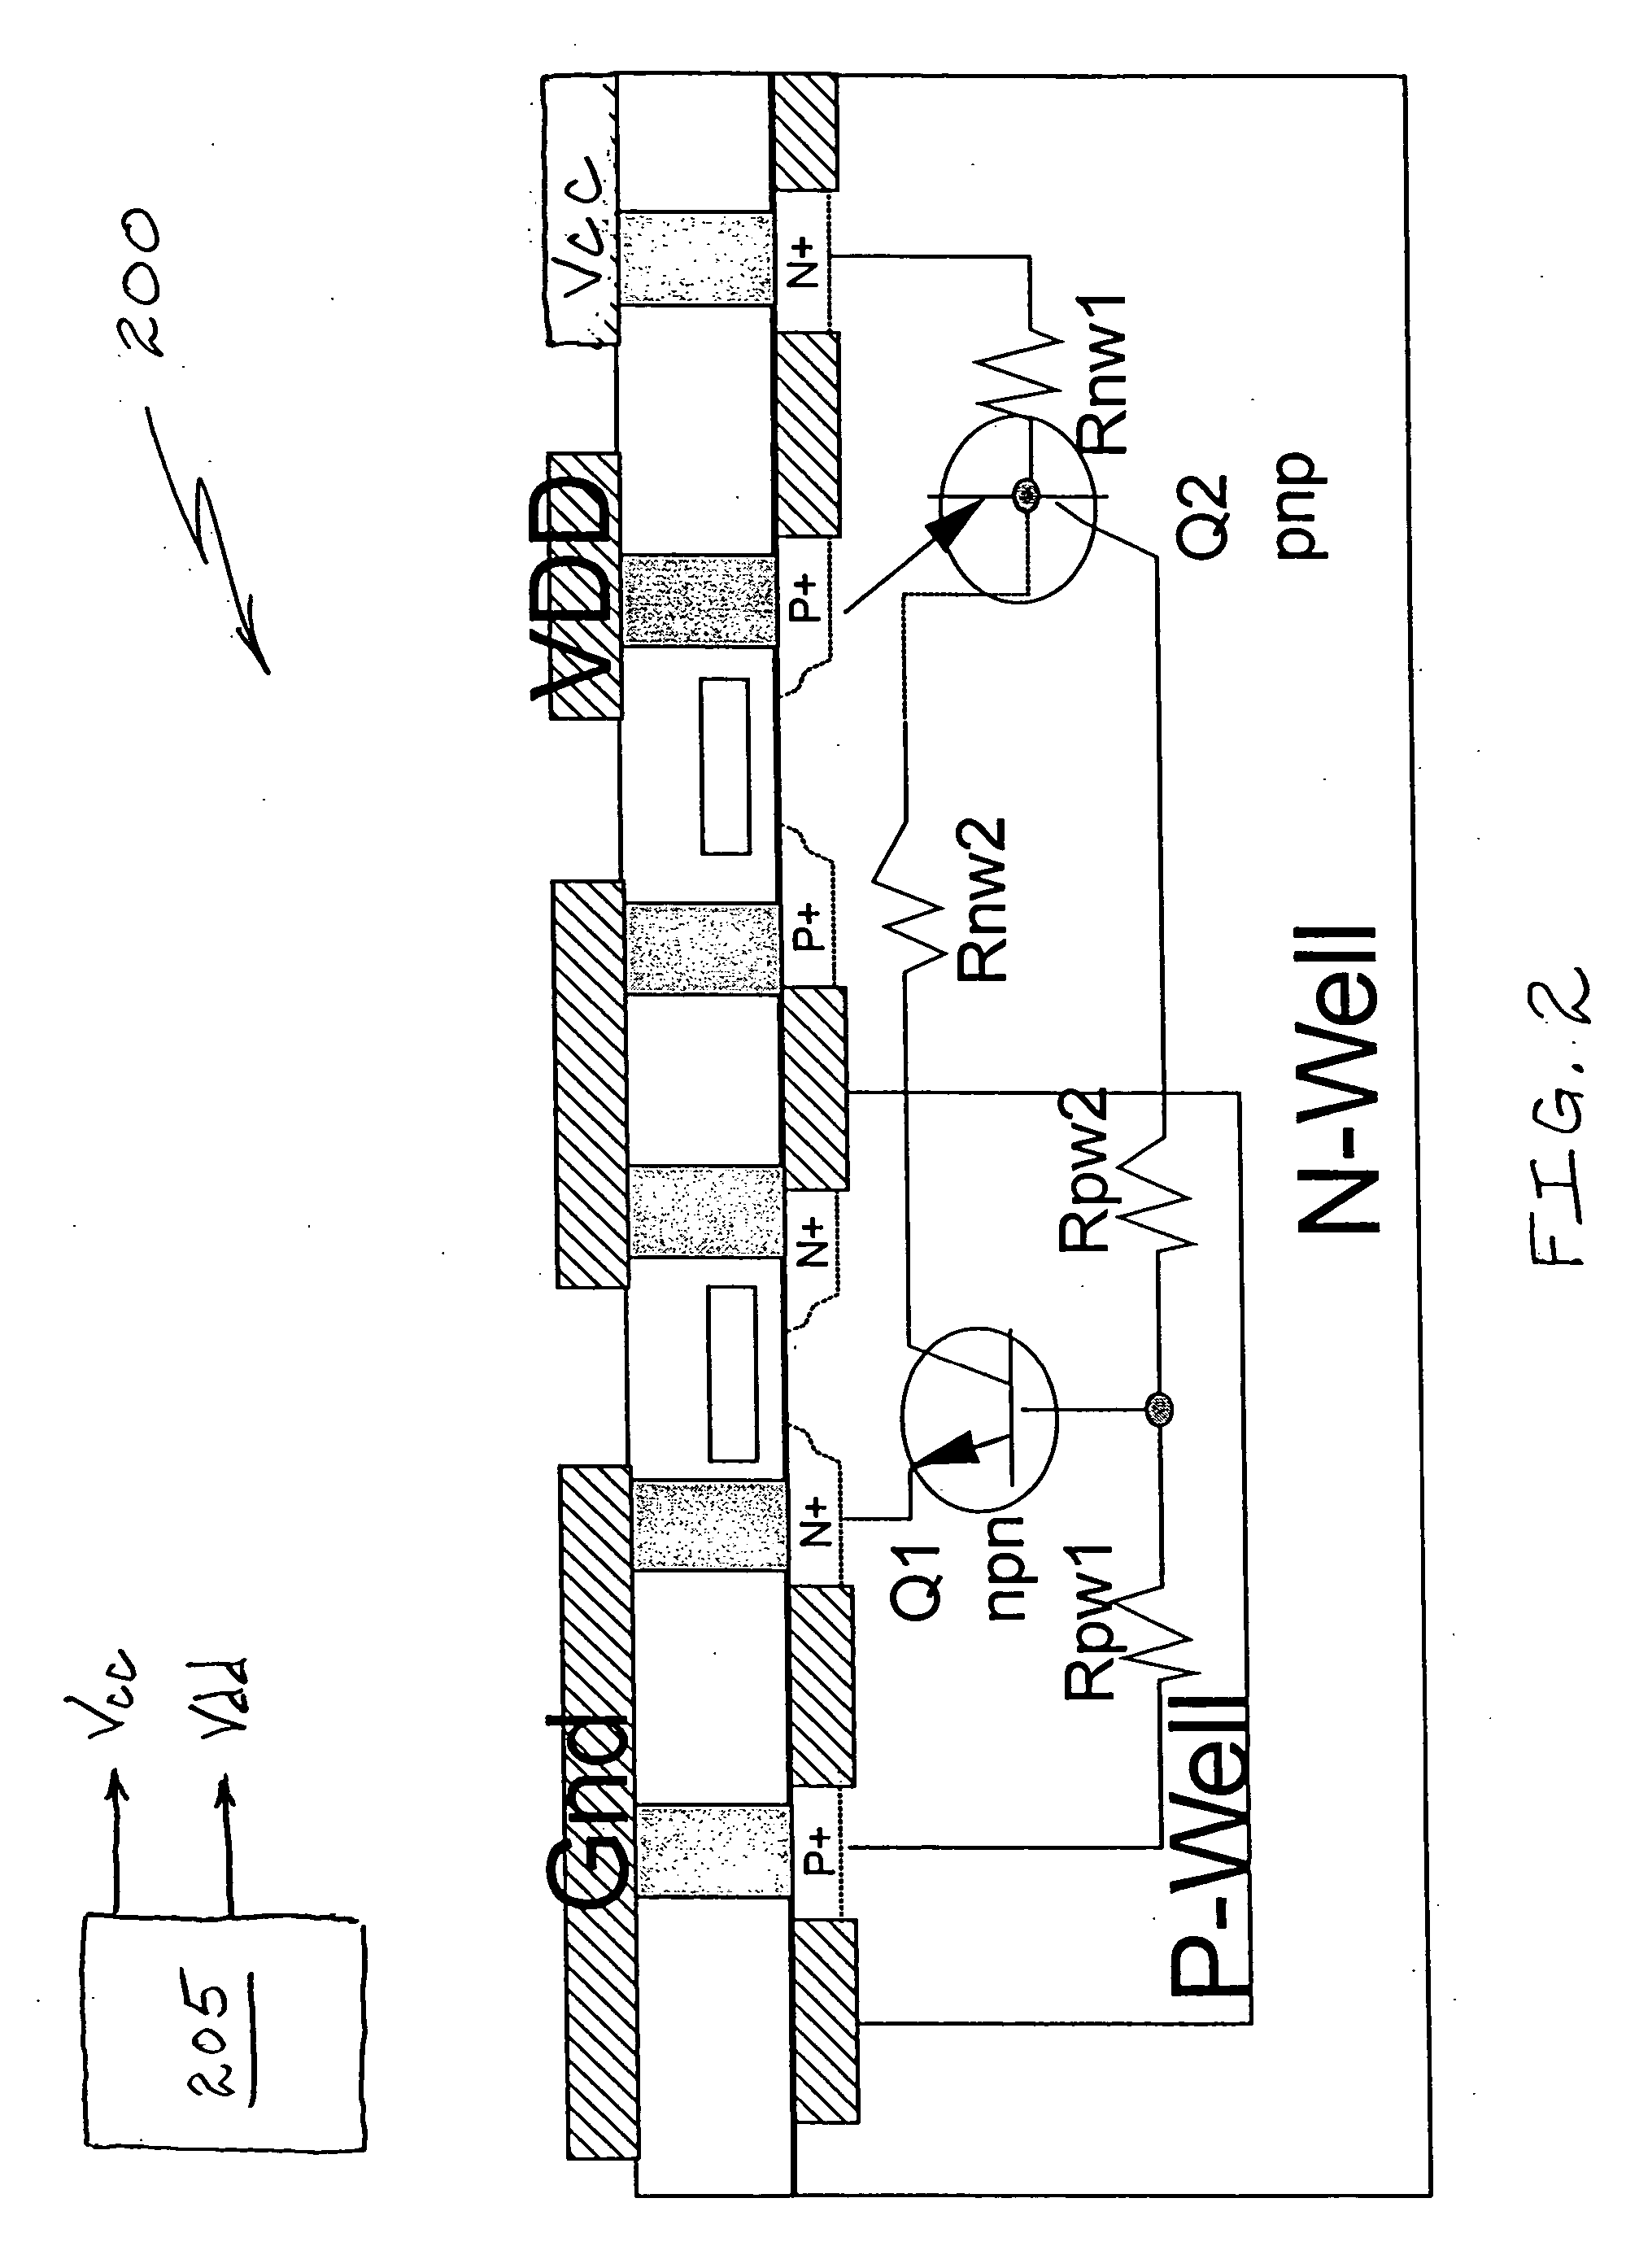 Multi-level power supply system for a complementary metal oxide semiconductor circuit